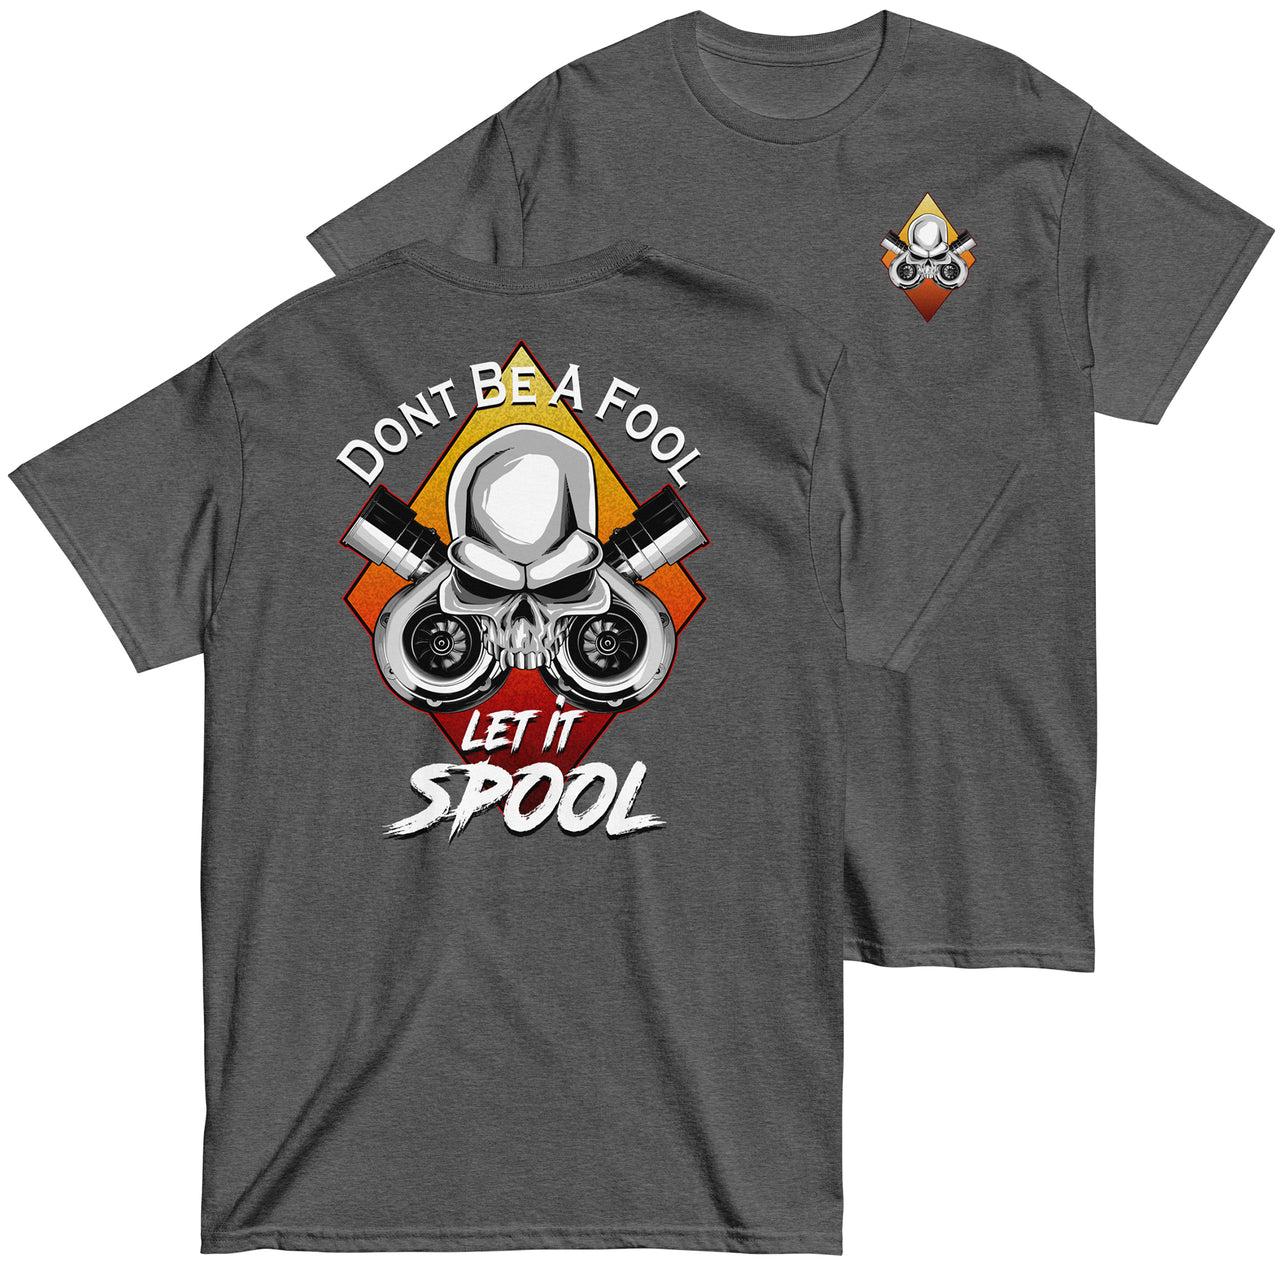 Dont Be A Fool - Spool Turbo T-Shirt in grey